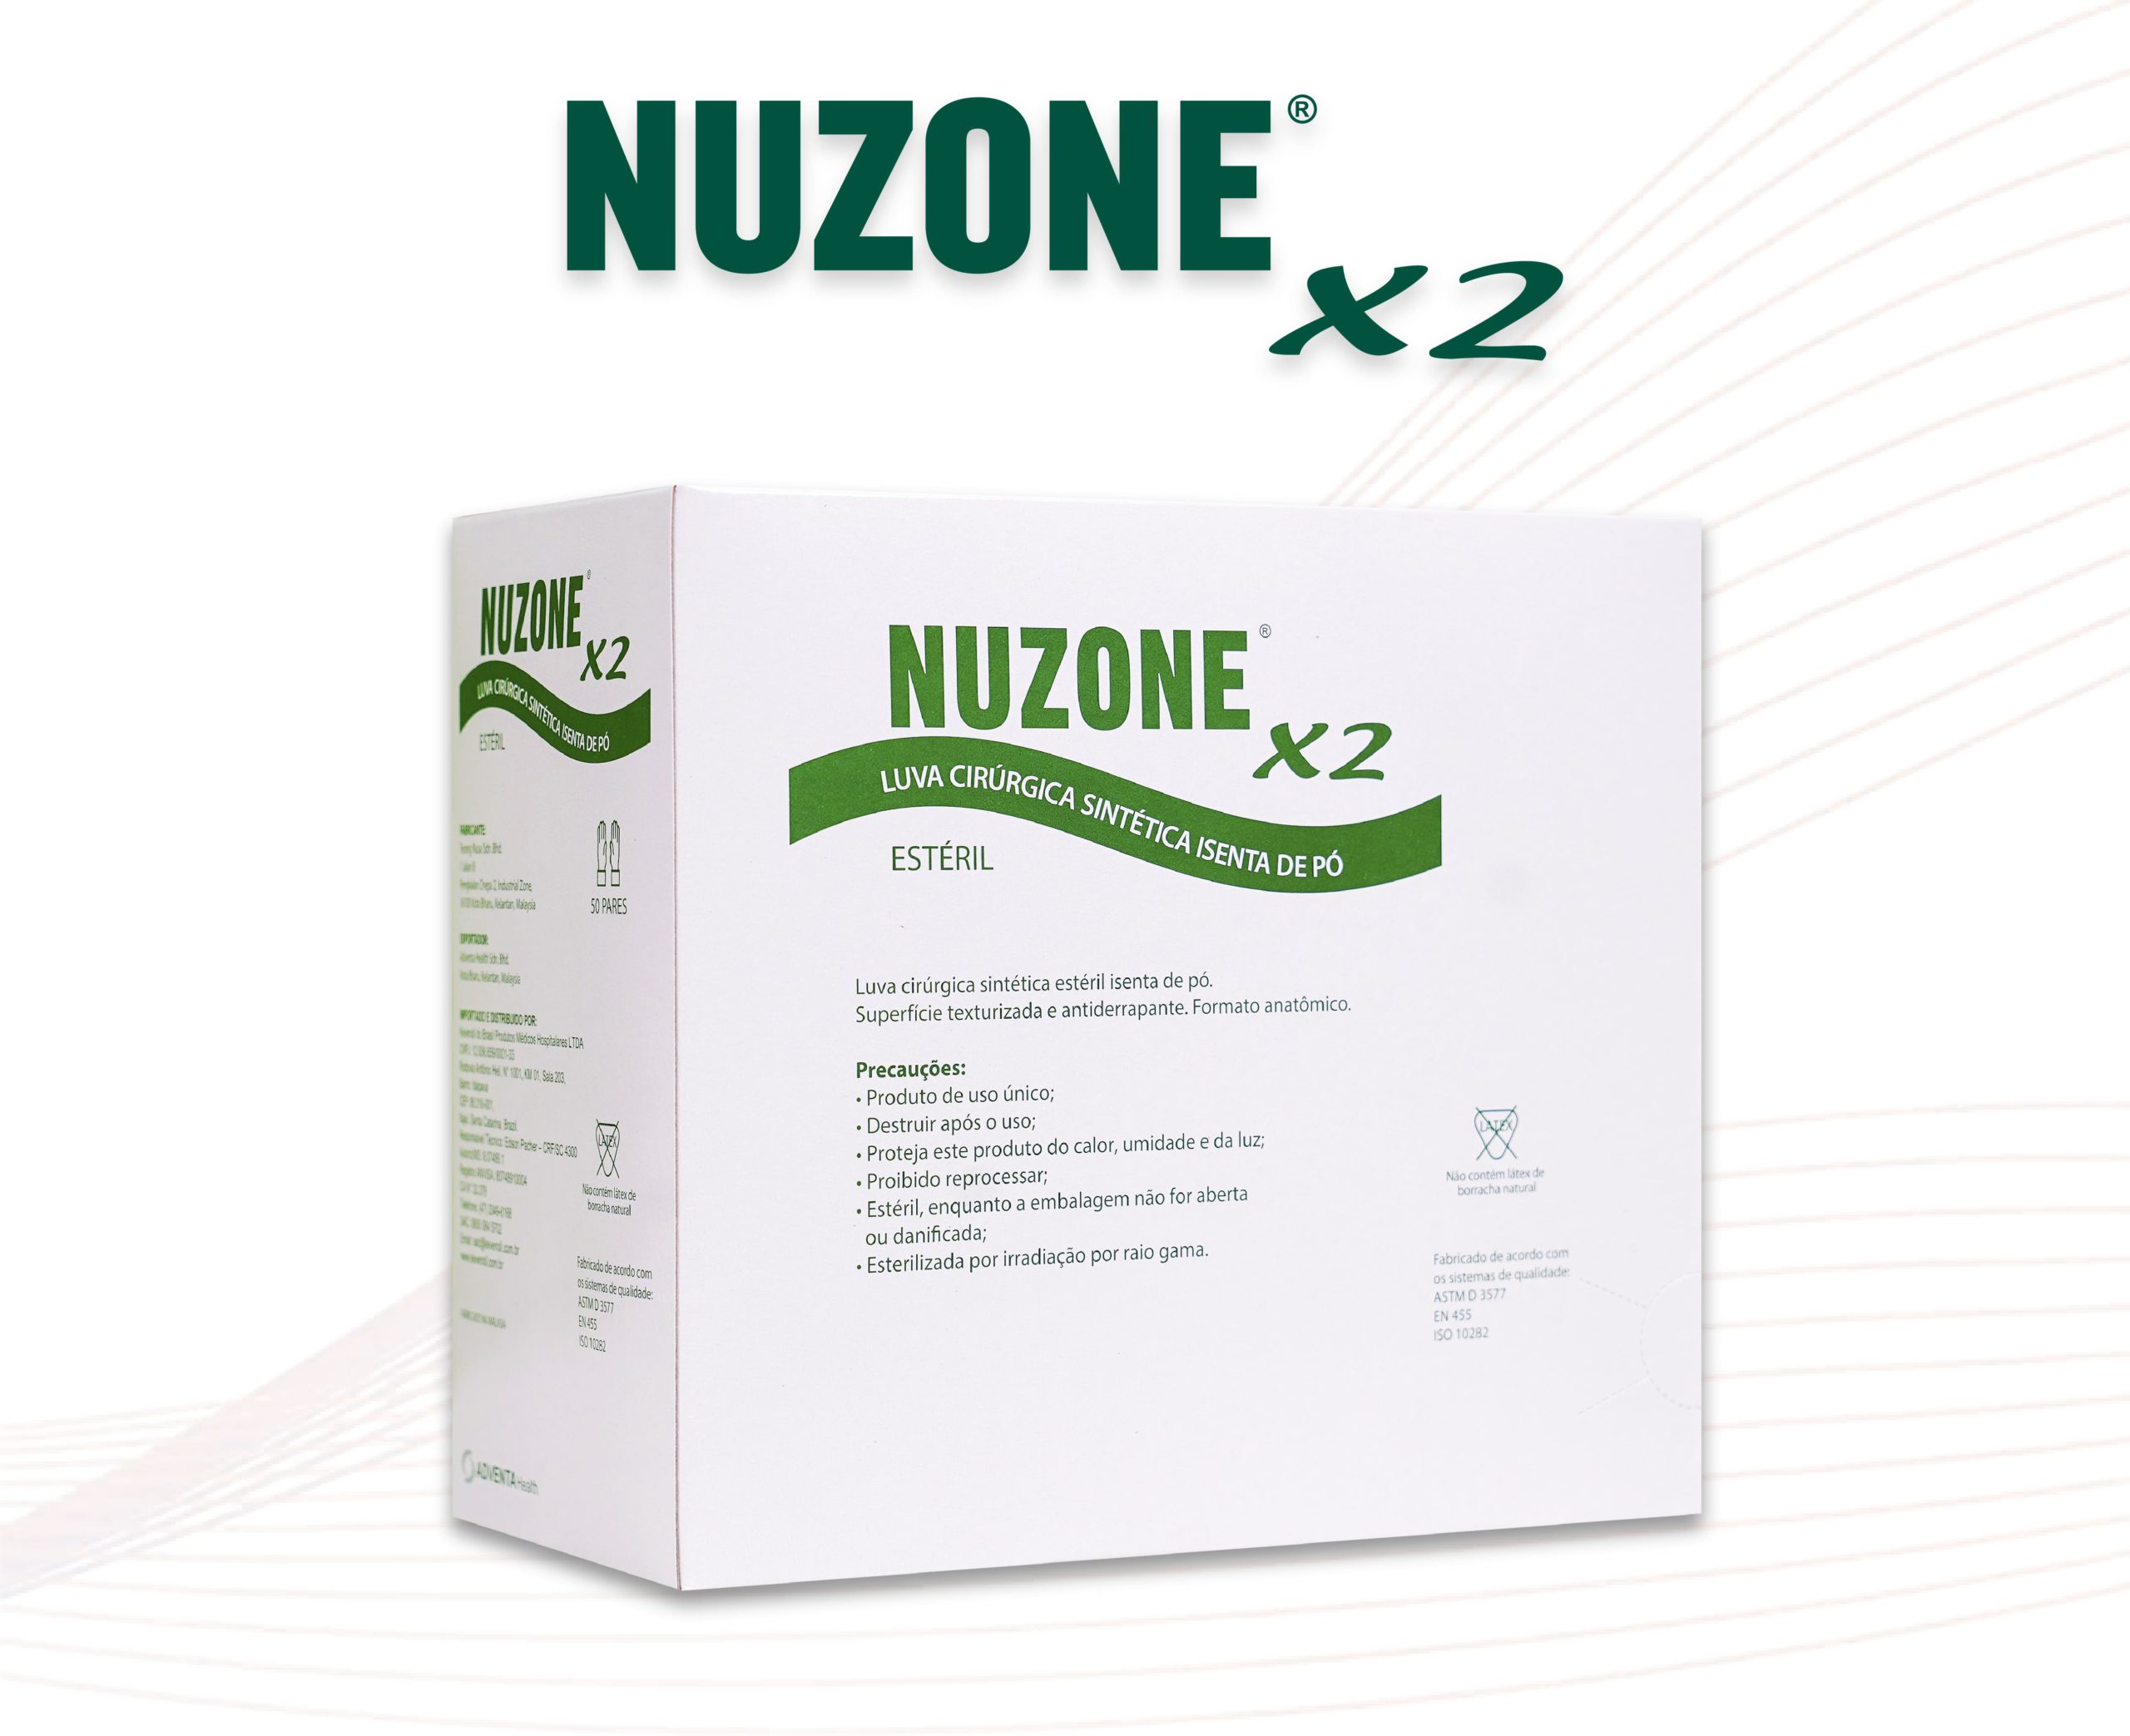 NUZONE X2 Surgical Gloves – Sterile, Synthetic, Dust-free